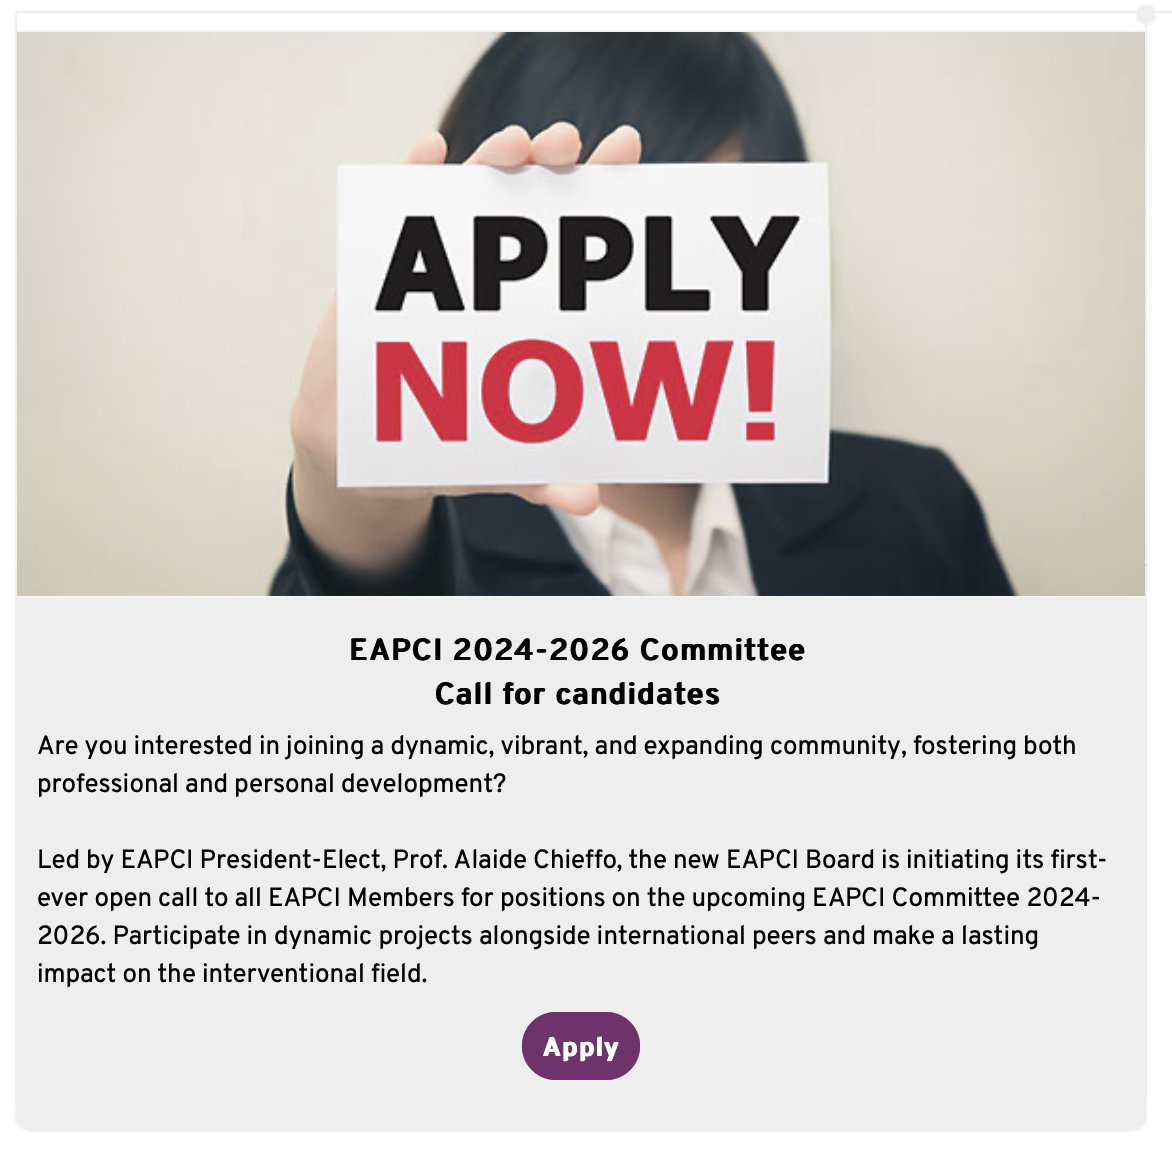 First-ever open call to ALL #EAPCI Members for positions on the upcoming #EAPCI Committees 2024- 2026 APPLY NOW to shape the future of #IC and #EAPCI: 🔗bit.ly/EAPCIcall 🫵YOU ARE #EAPCI🫵